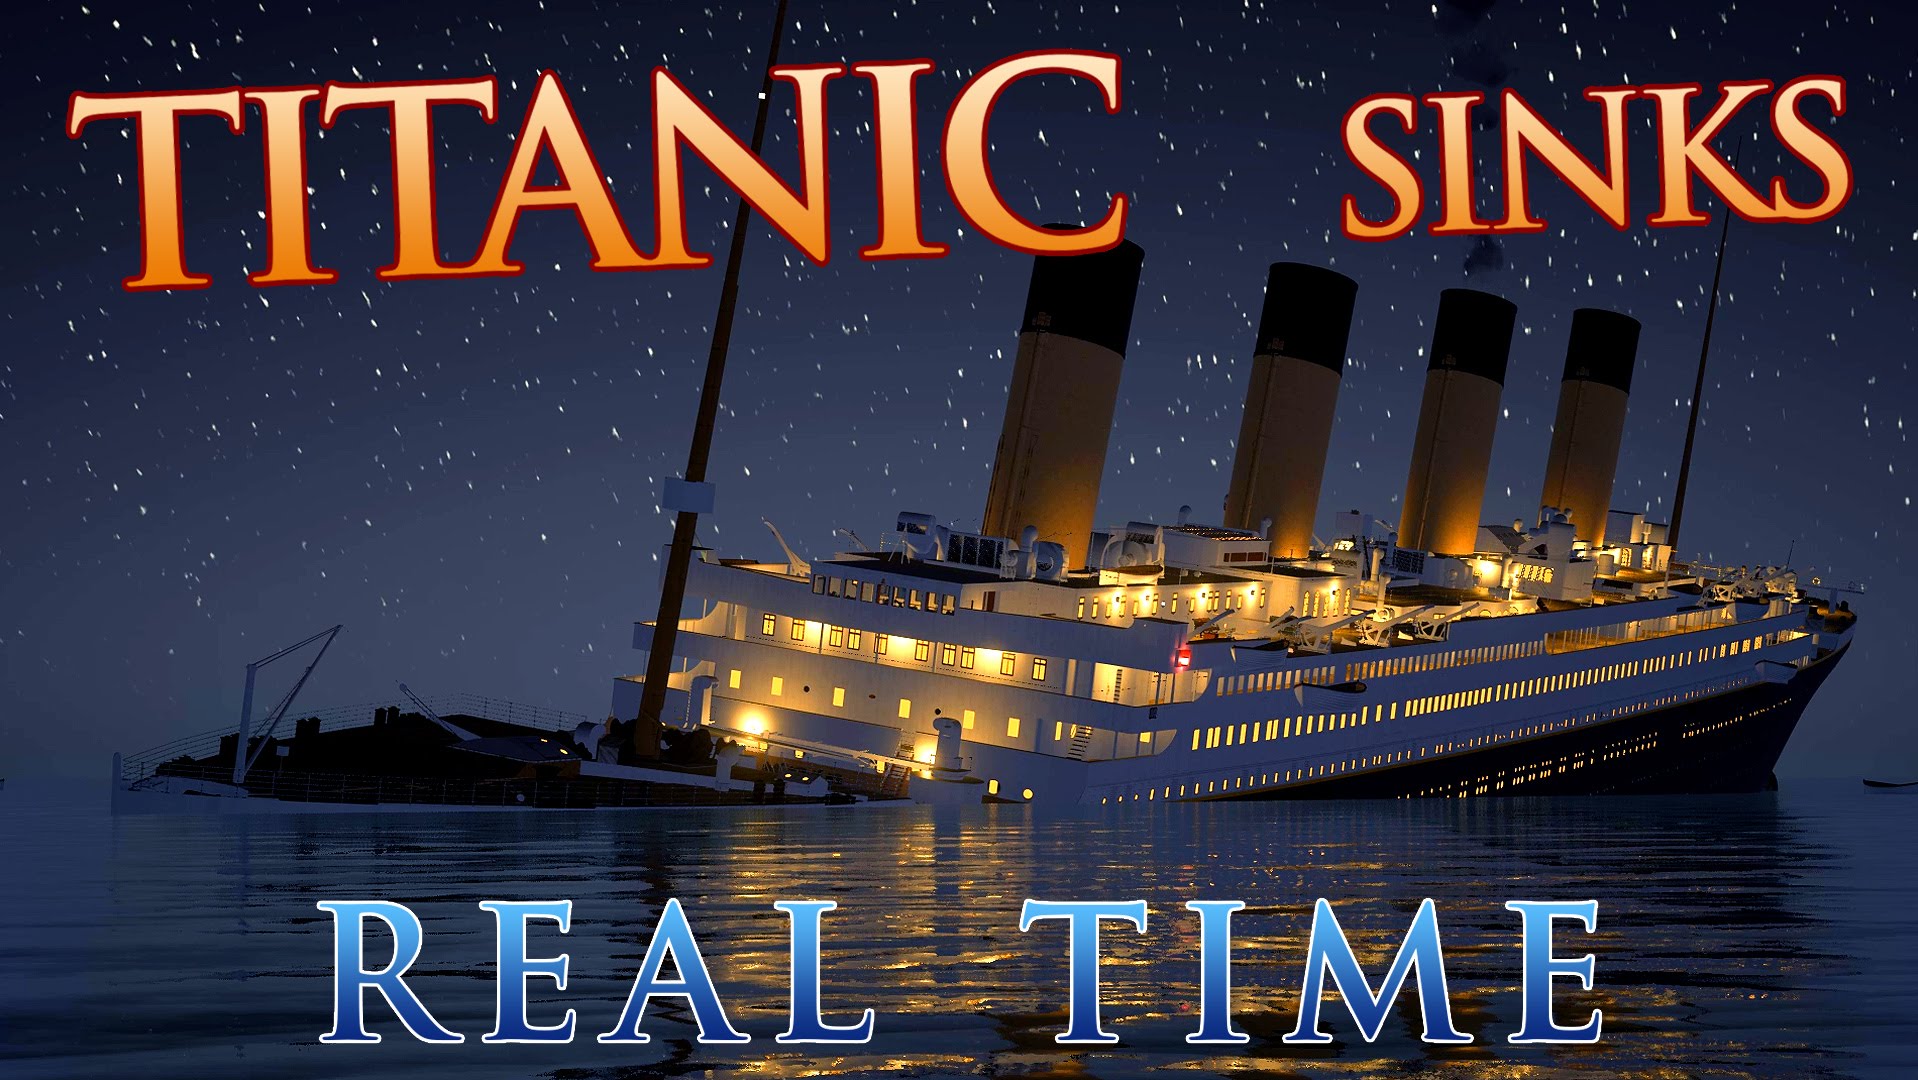 Titanic sinks in REAL TIME - 2 HOURS 40 MINUTES - YouTube